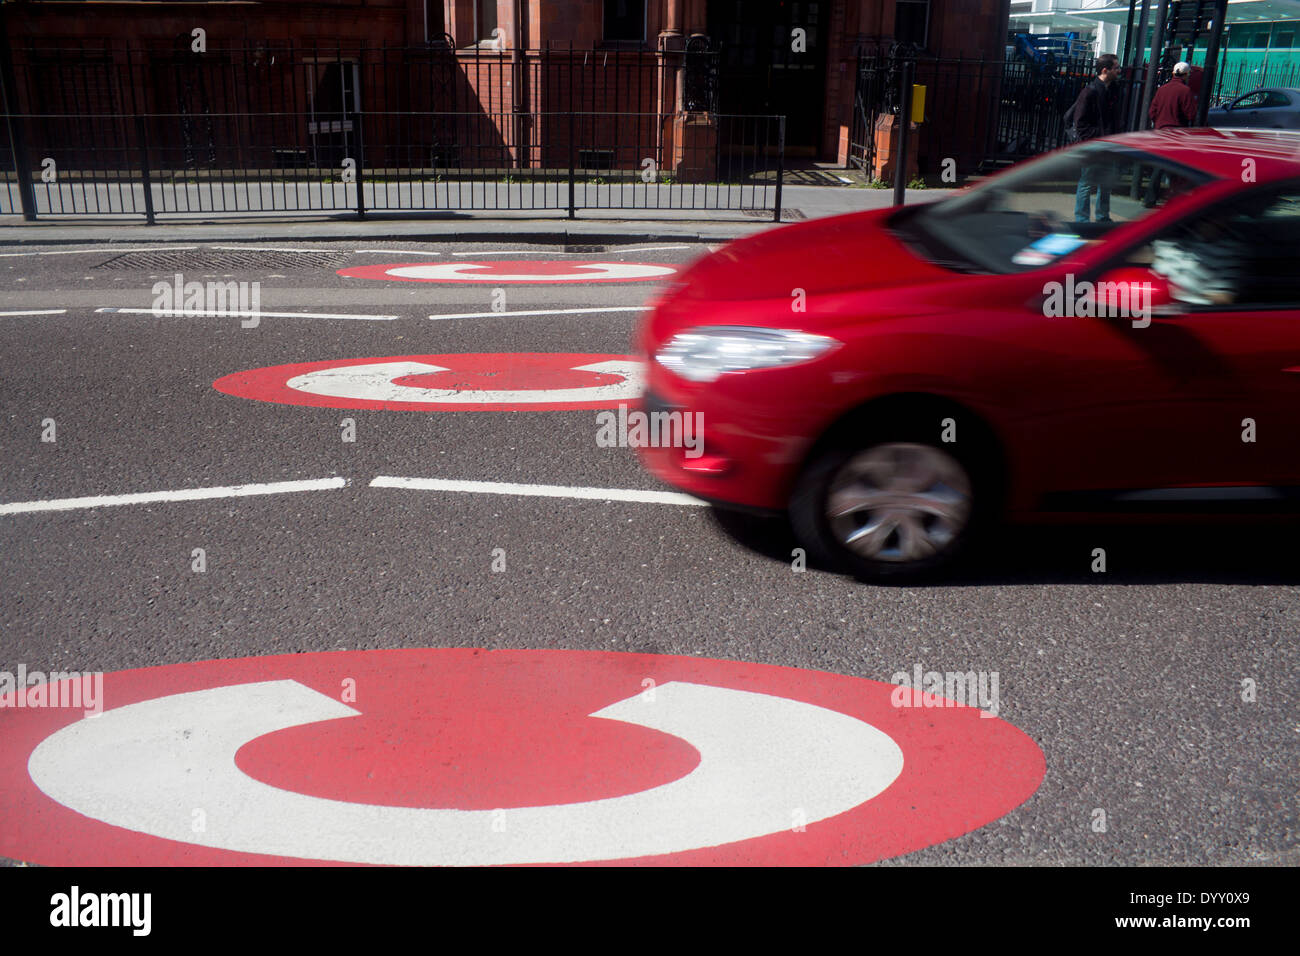 Congestion charge signs Red car crossing into Central London traffic congestion zone Gower Street London England UK Stock Photo